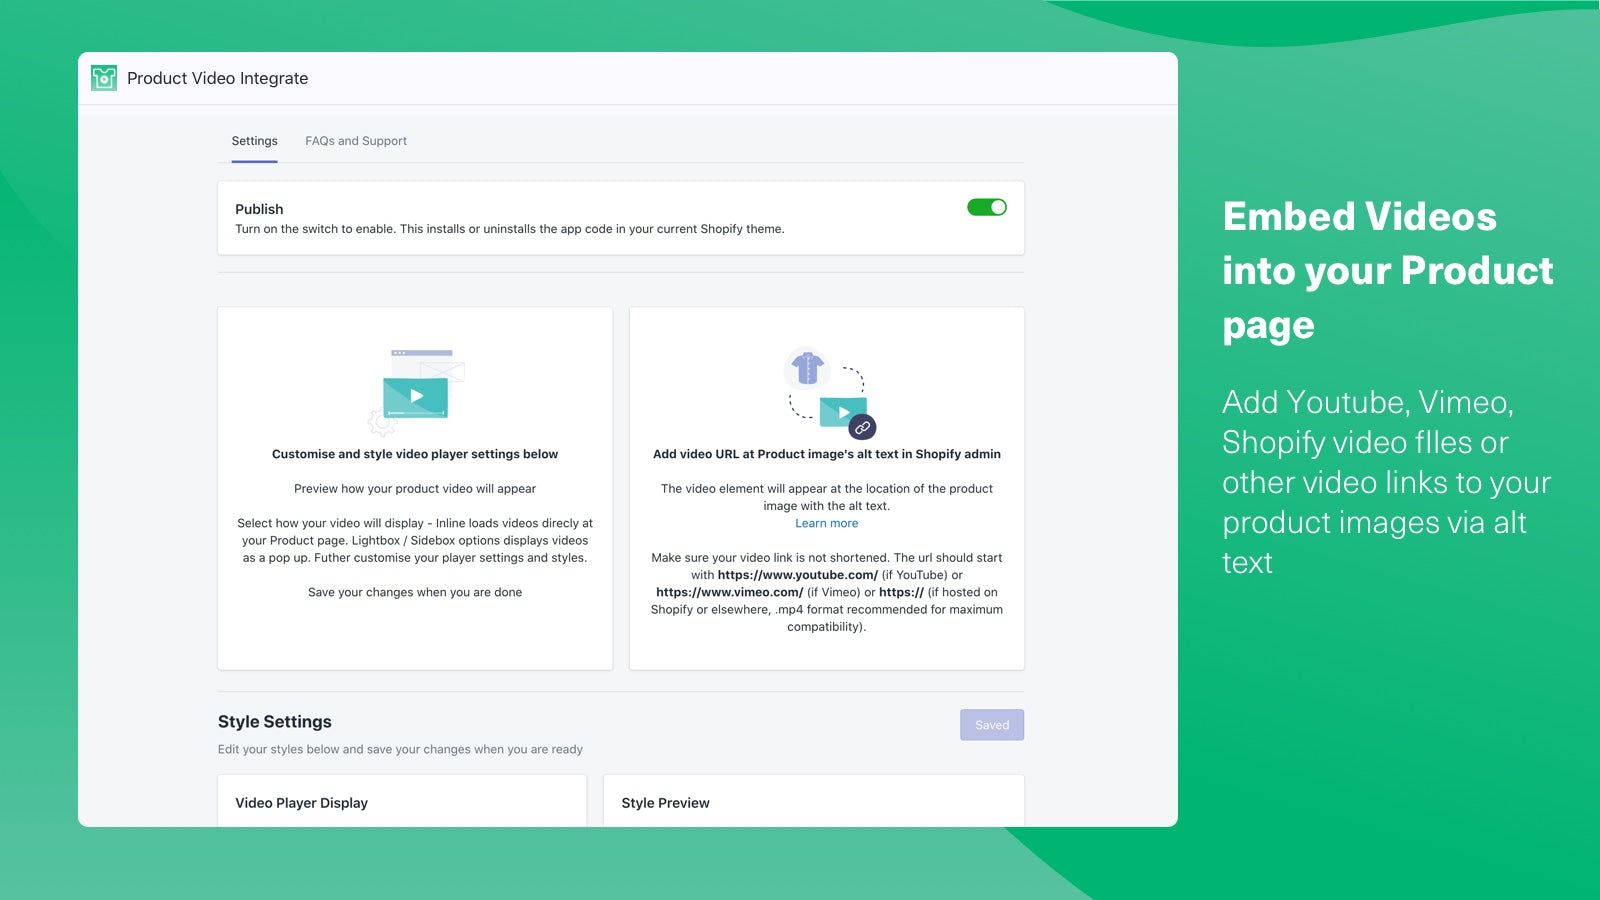 Embed Videos into your Product page